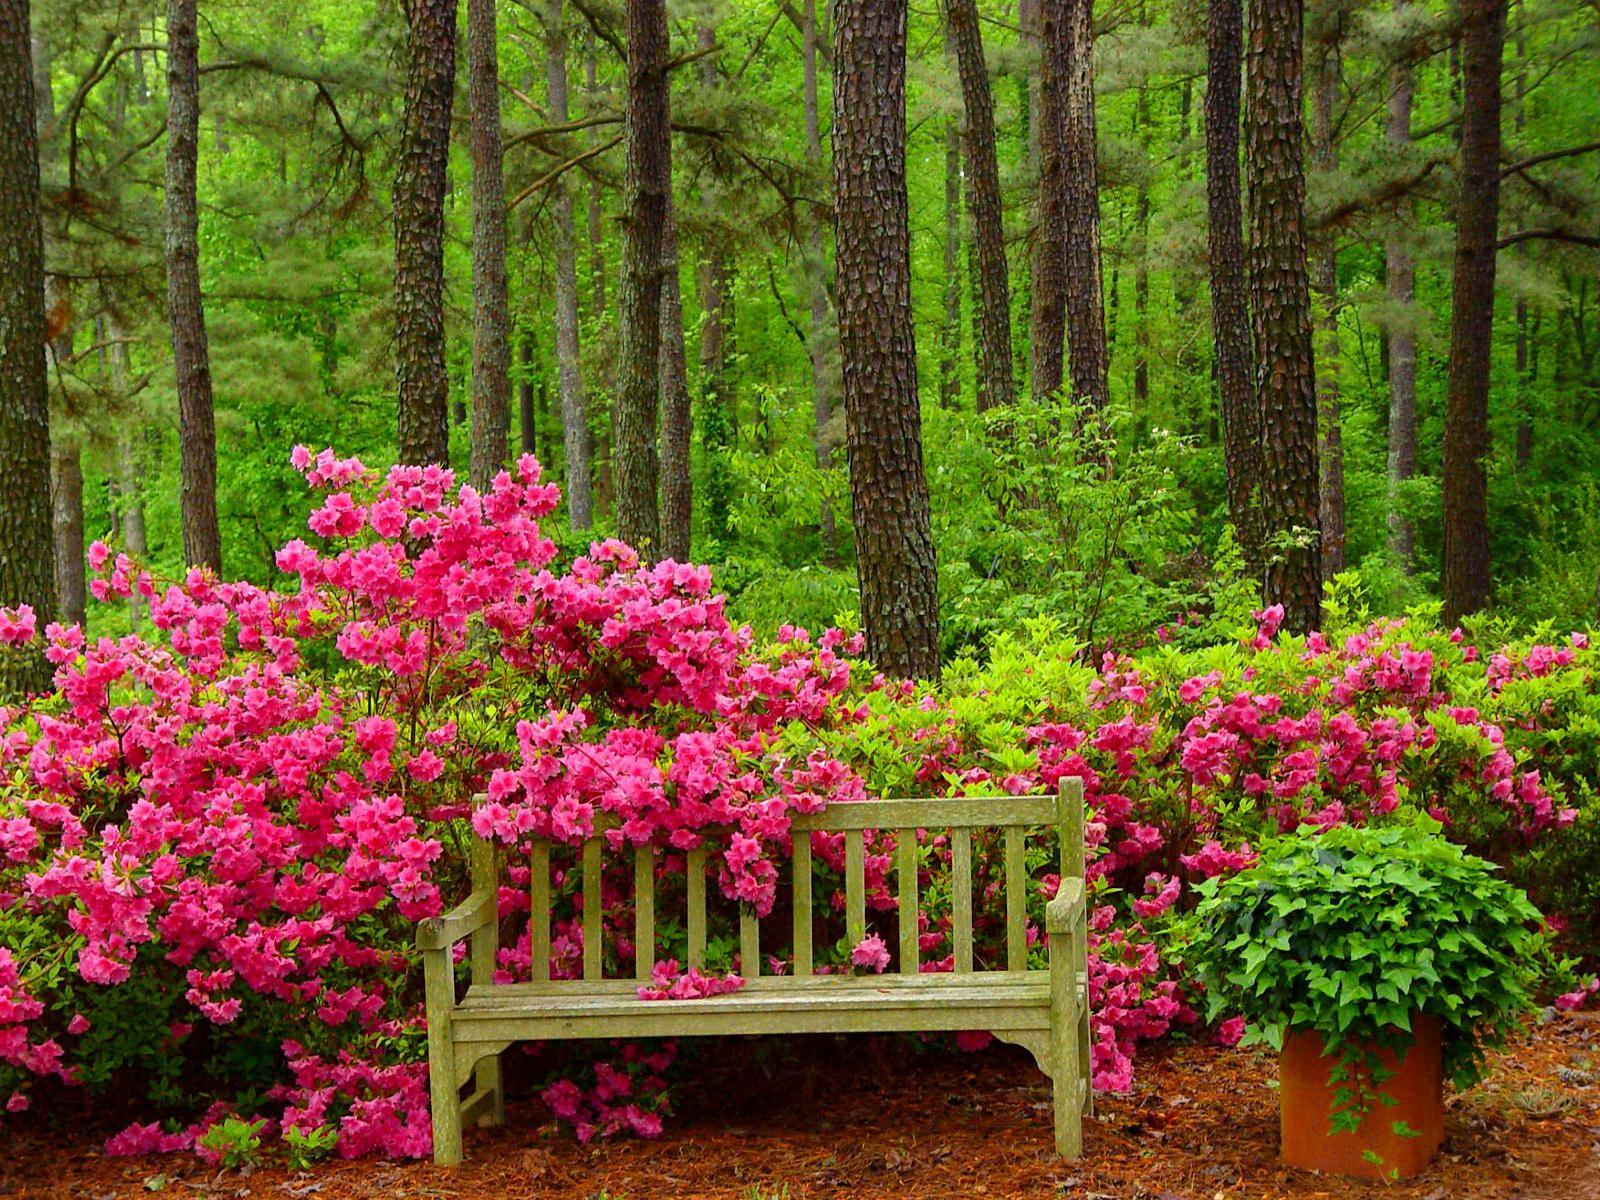 Bench in Spring Forest Wallpaper and Background Imagex1200